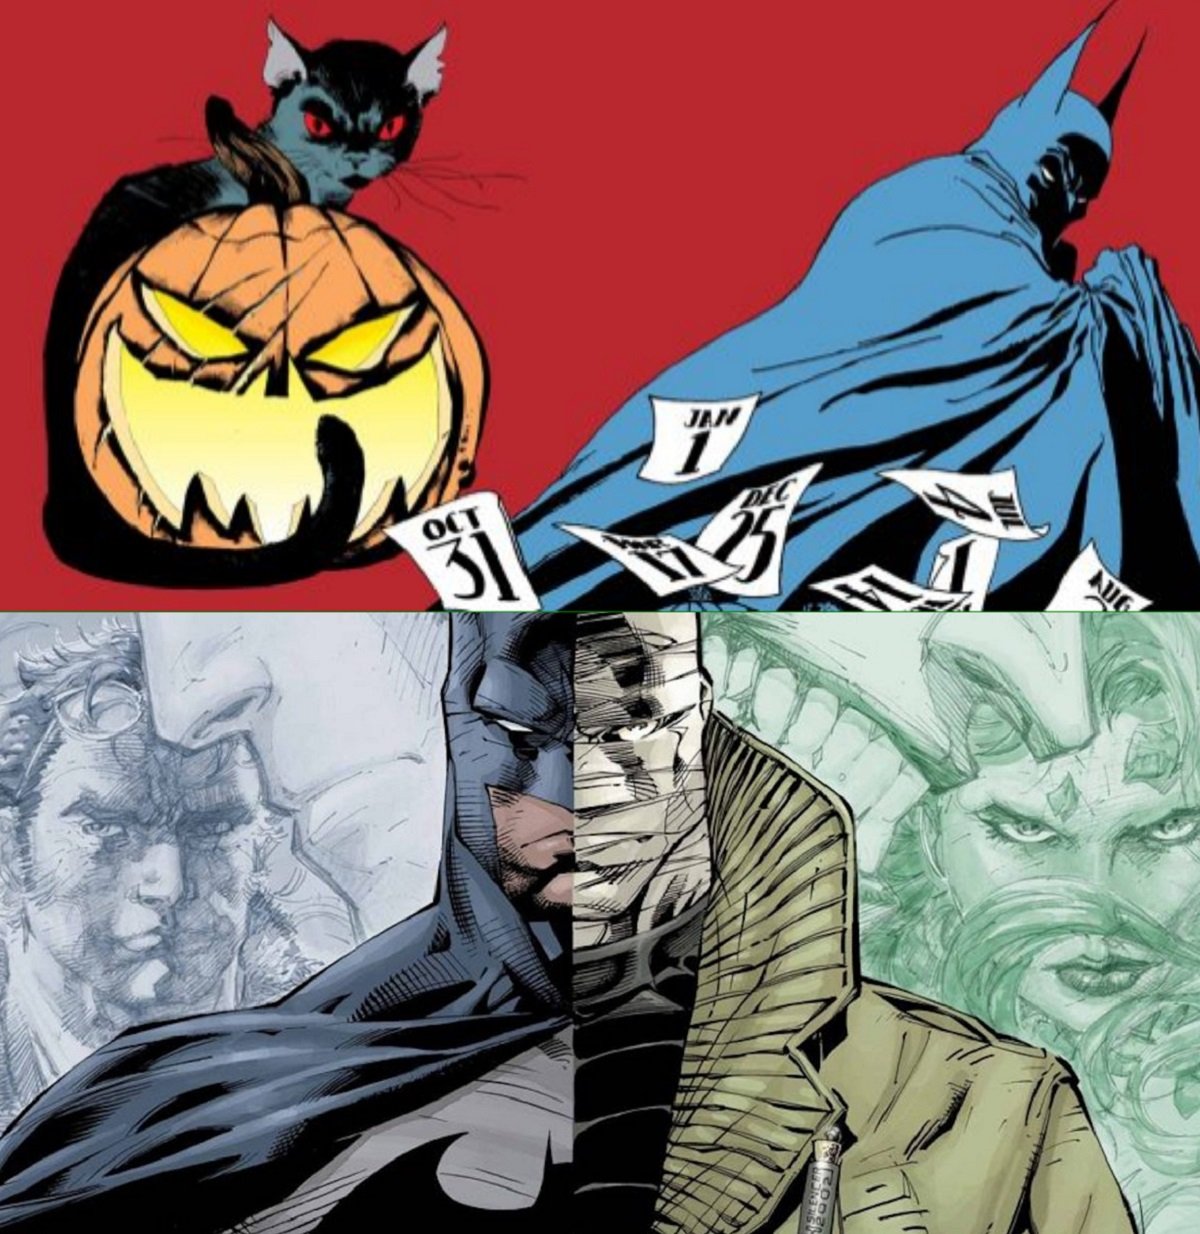 Tim Sale's art from Batman: The Long Halloween, and Jim Lee's art from Hush, both written by Jeph Loeb. 